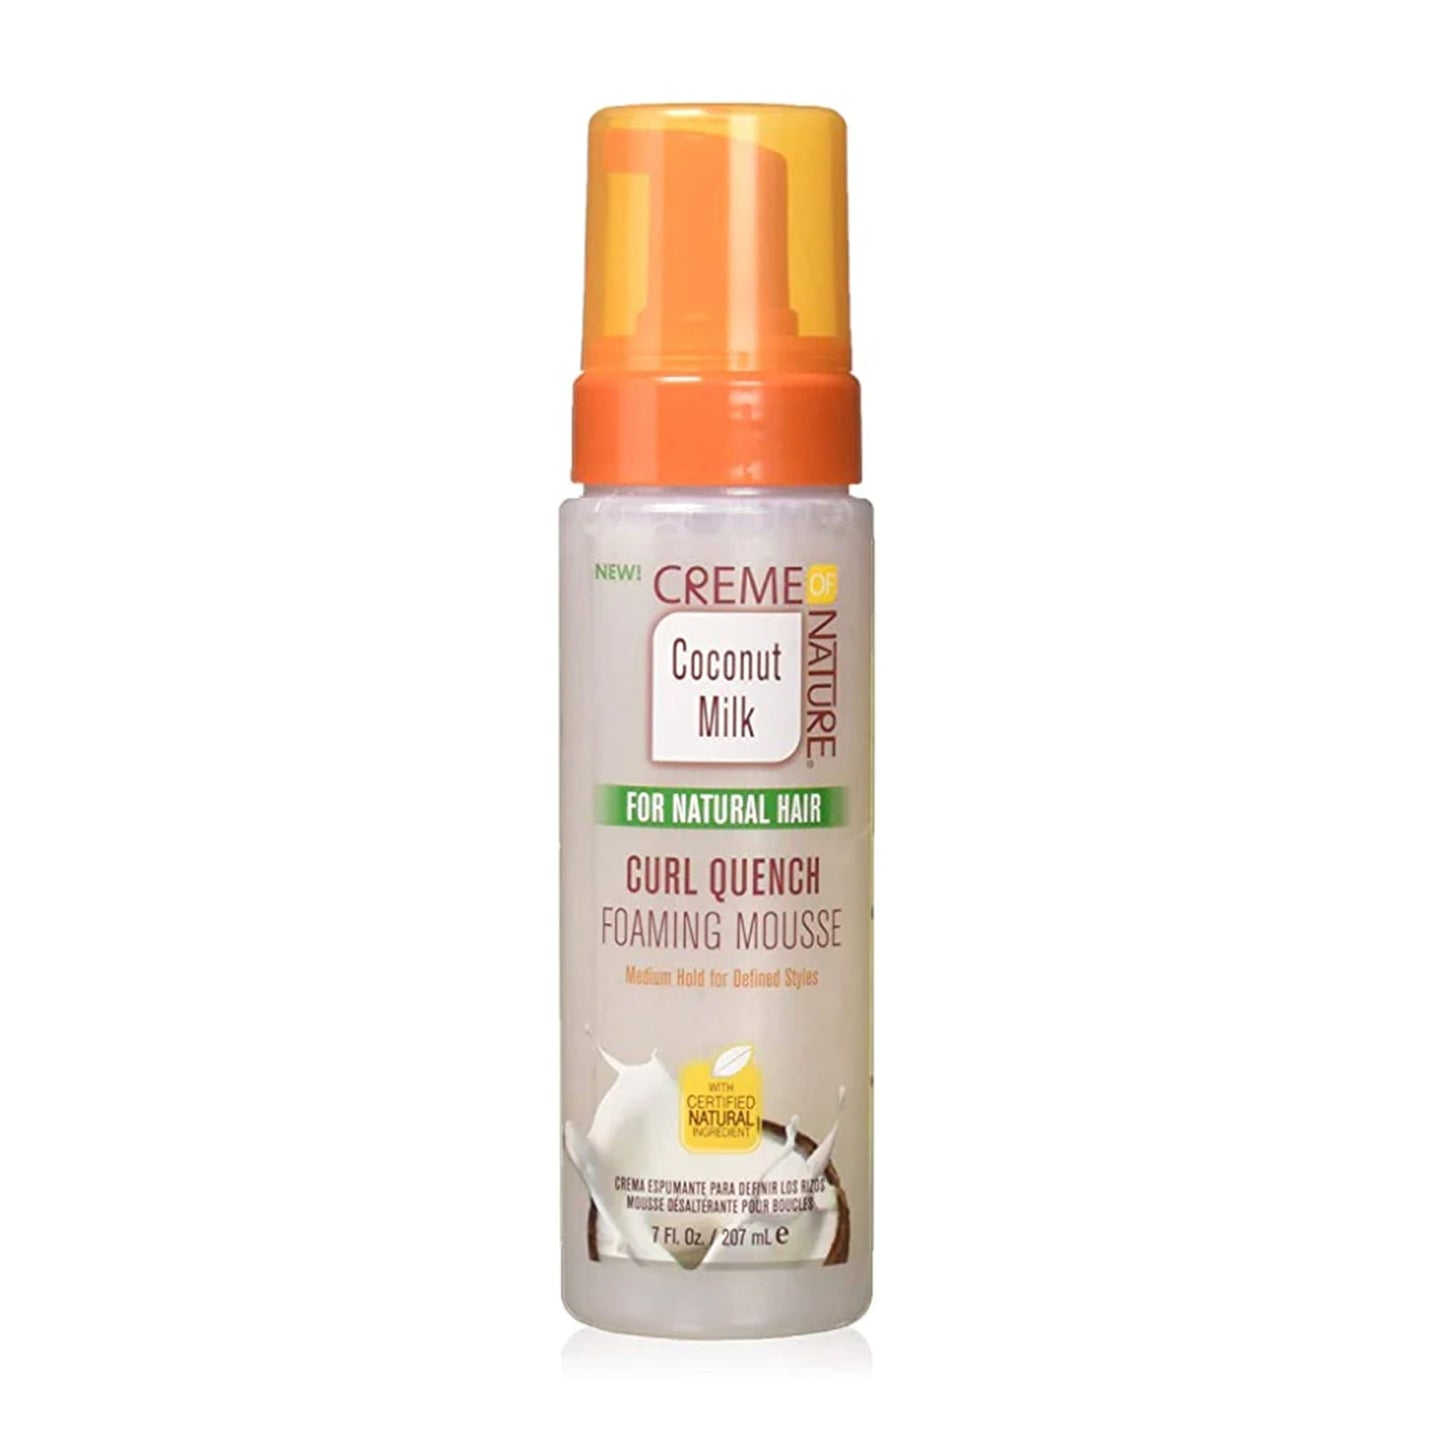 CREME OF NATURE - COCONUT MILK CURL QUENCH FOAMING MOUSSE - 207ML